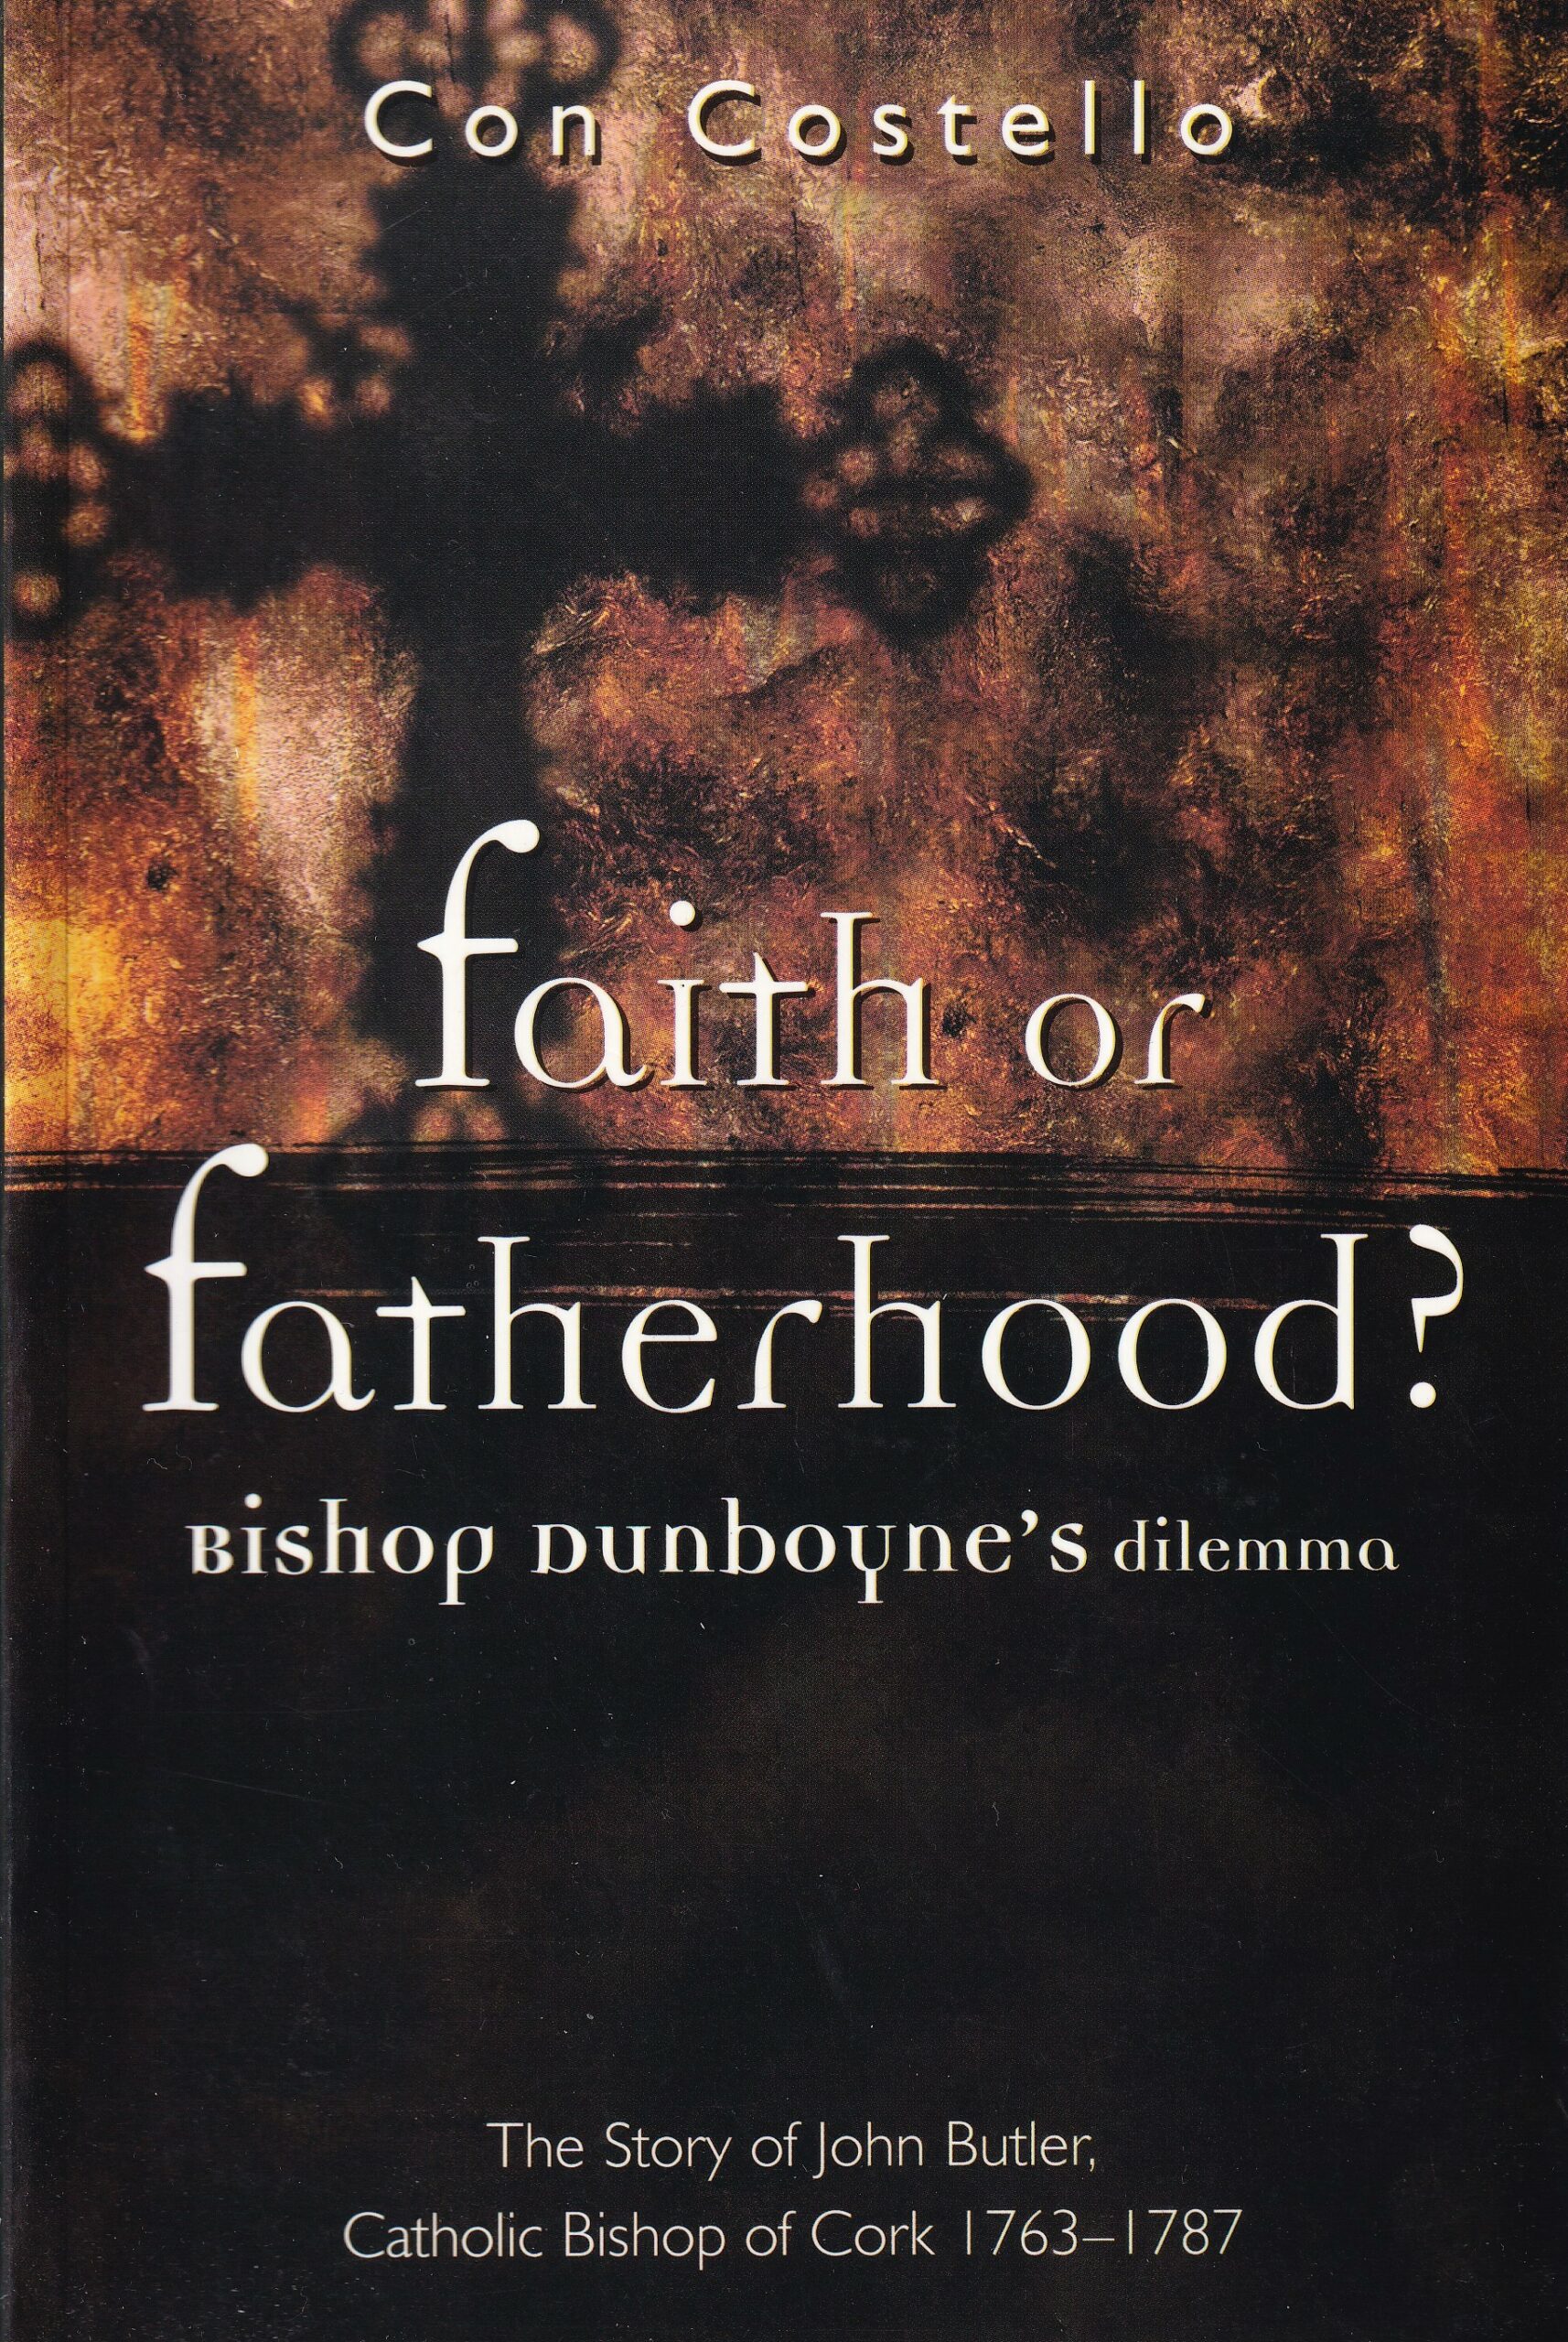 Faith or Fatherhood? Bishop Dunboyne’s Dilemma: The Story of John Butler, Catholic Bishop of Cork, 1763-1787 by Con Costello